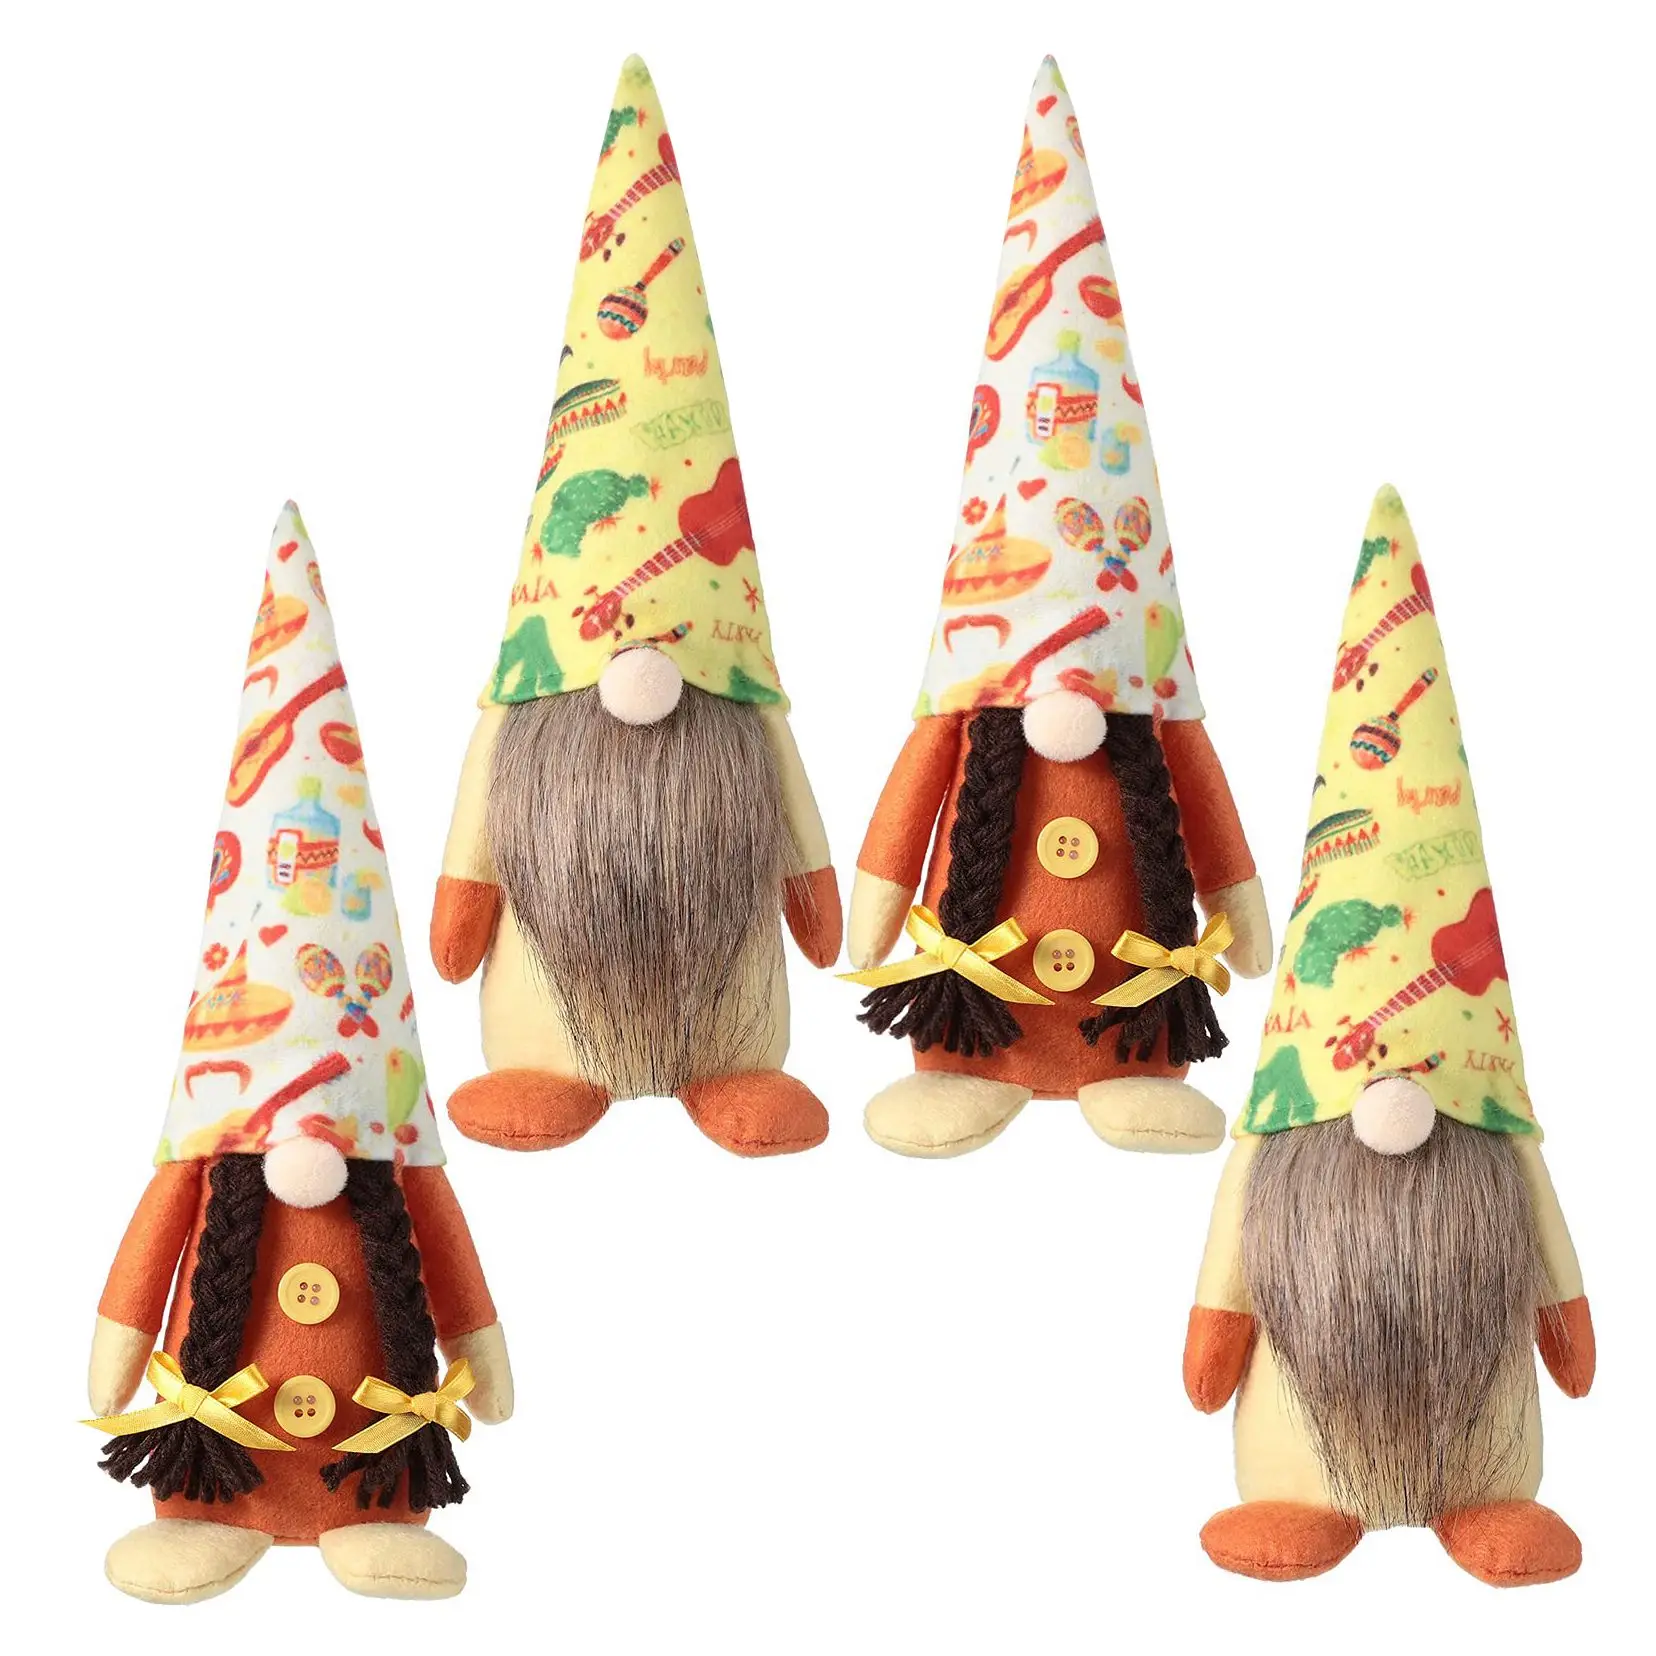 

4 Pieces Fiesta Gnome Couple Cinco De Mayo Tomte Handmade Scandinavian Ornaments for Home Kitchen Tiered Tray Decoration